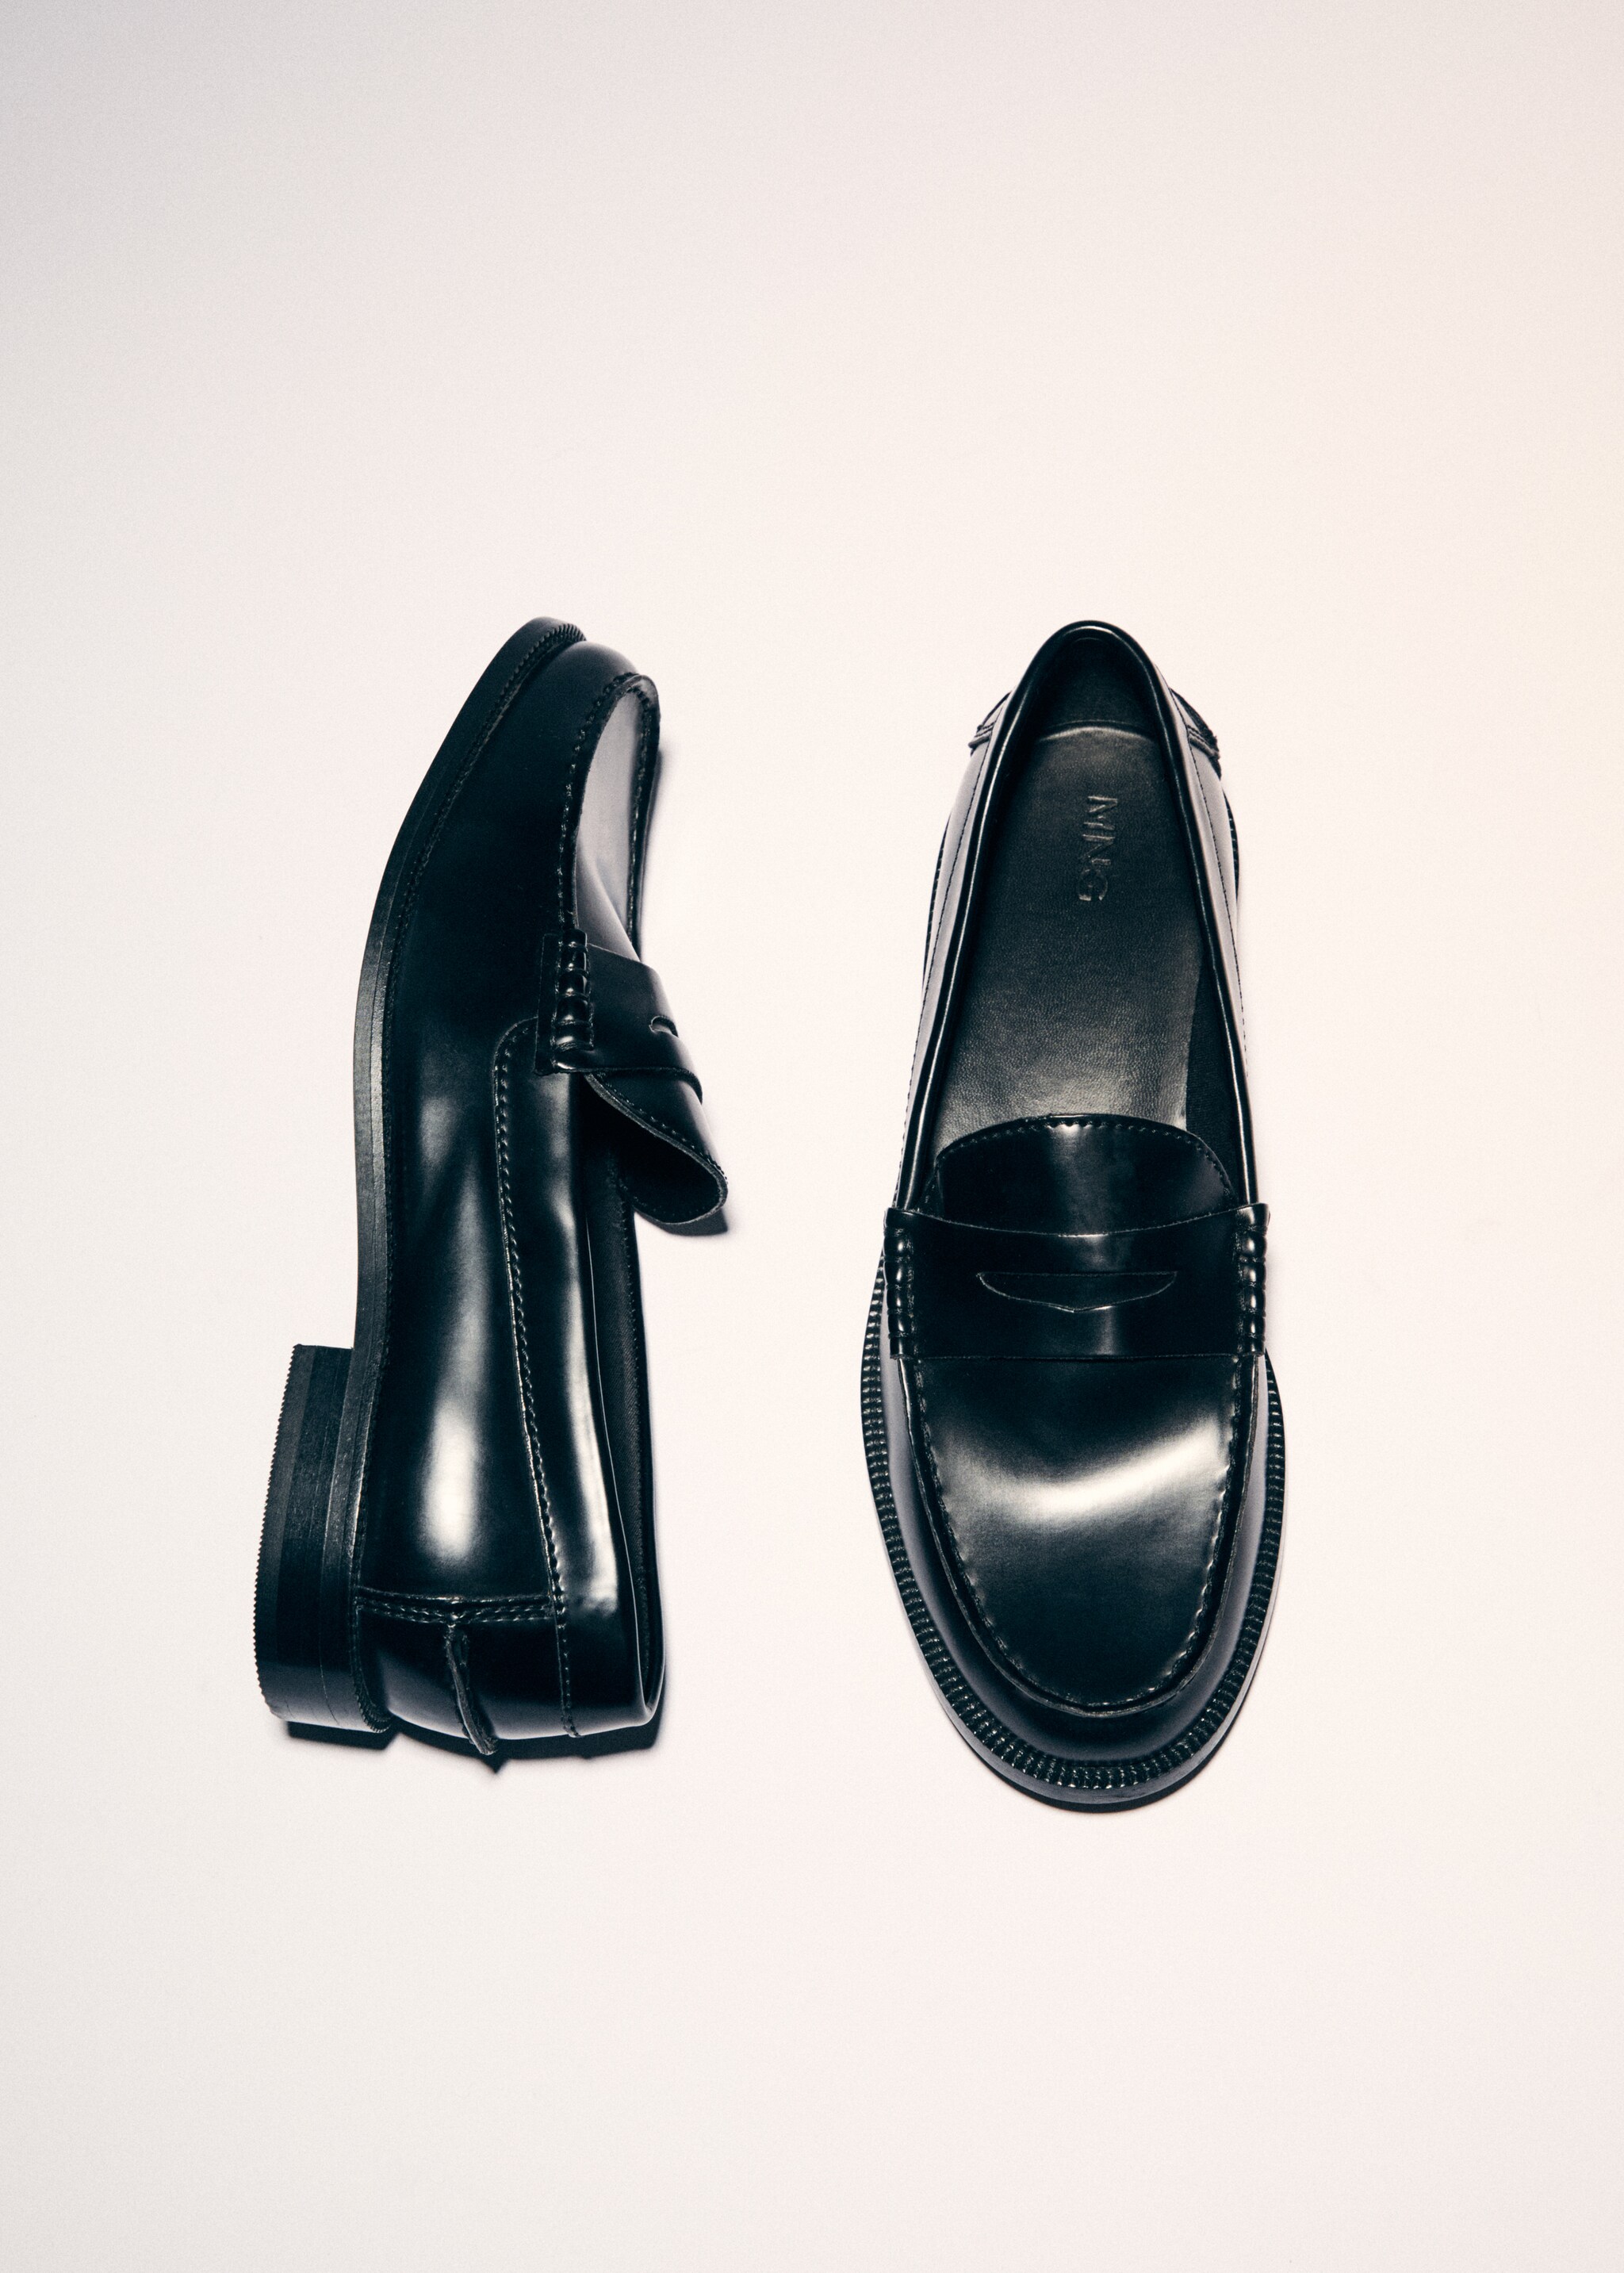 Classic loafers - Details of the article 9